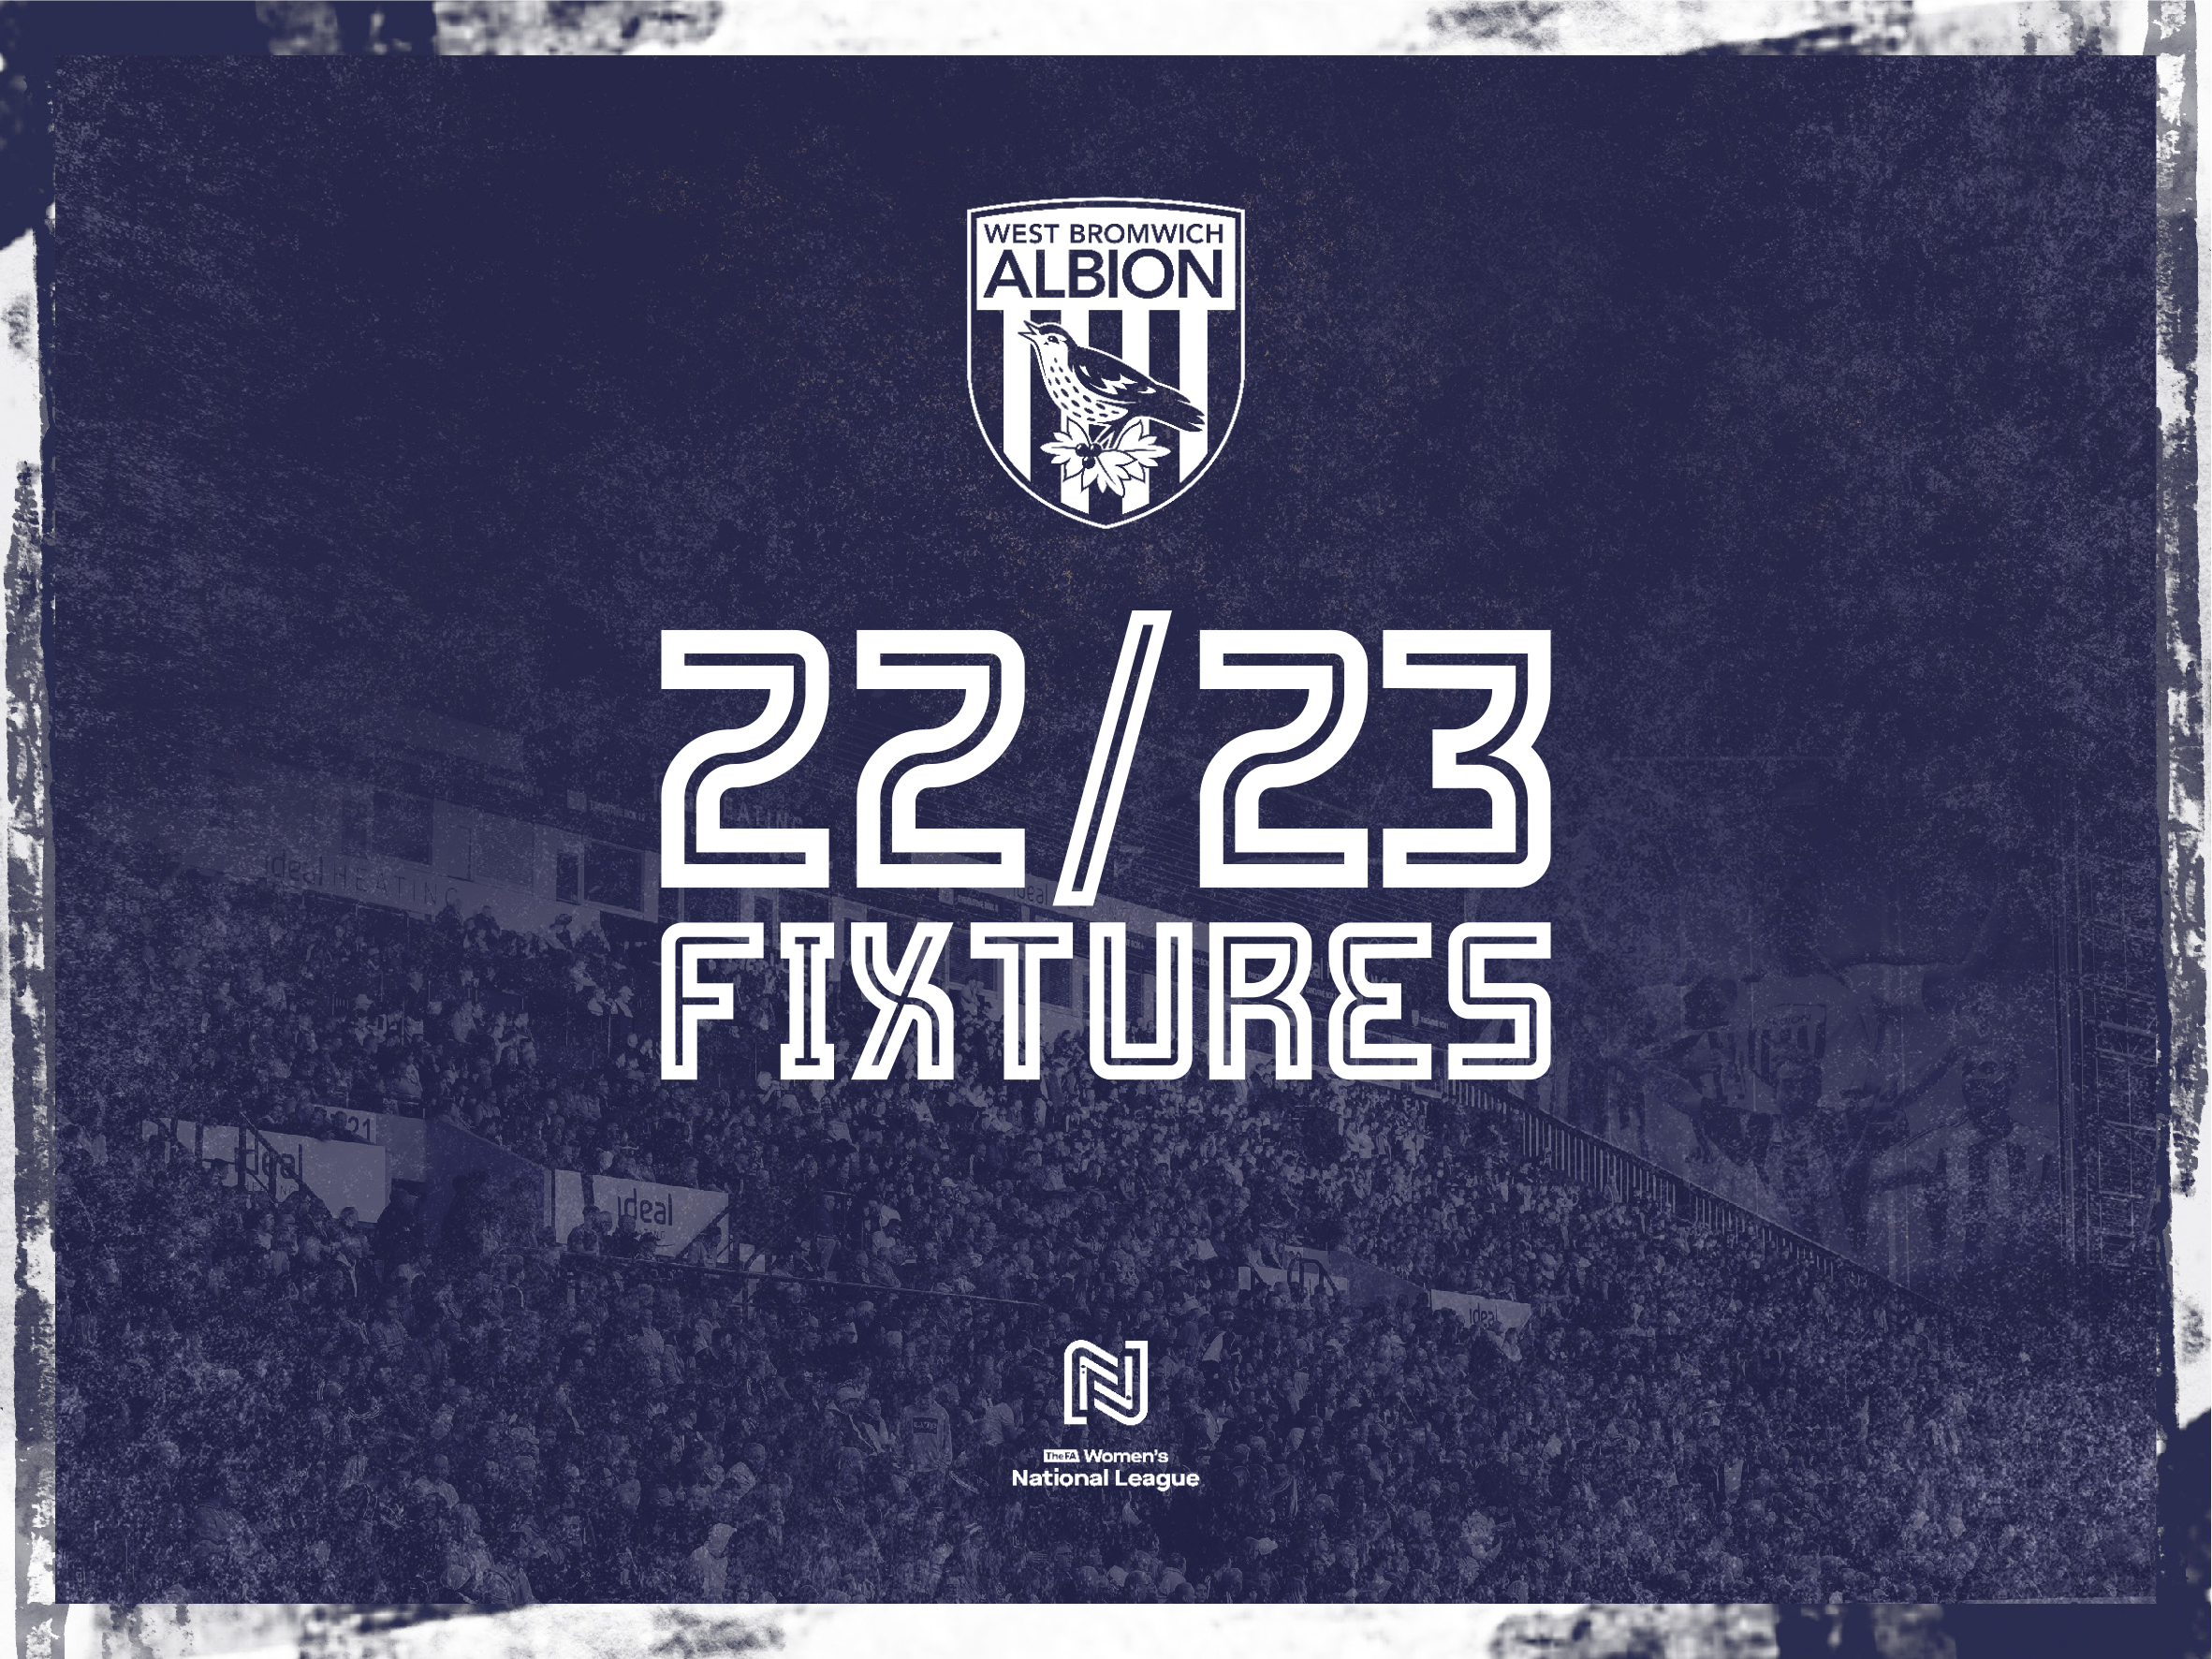 Albion Women's fixtures for the 2022/23 season have been released